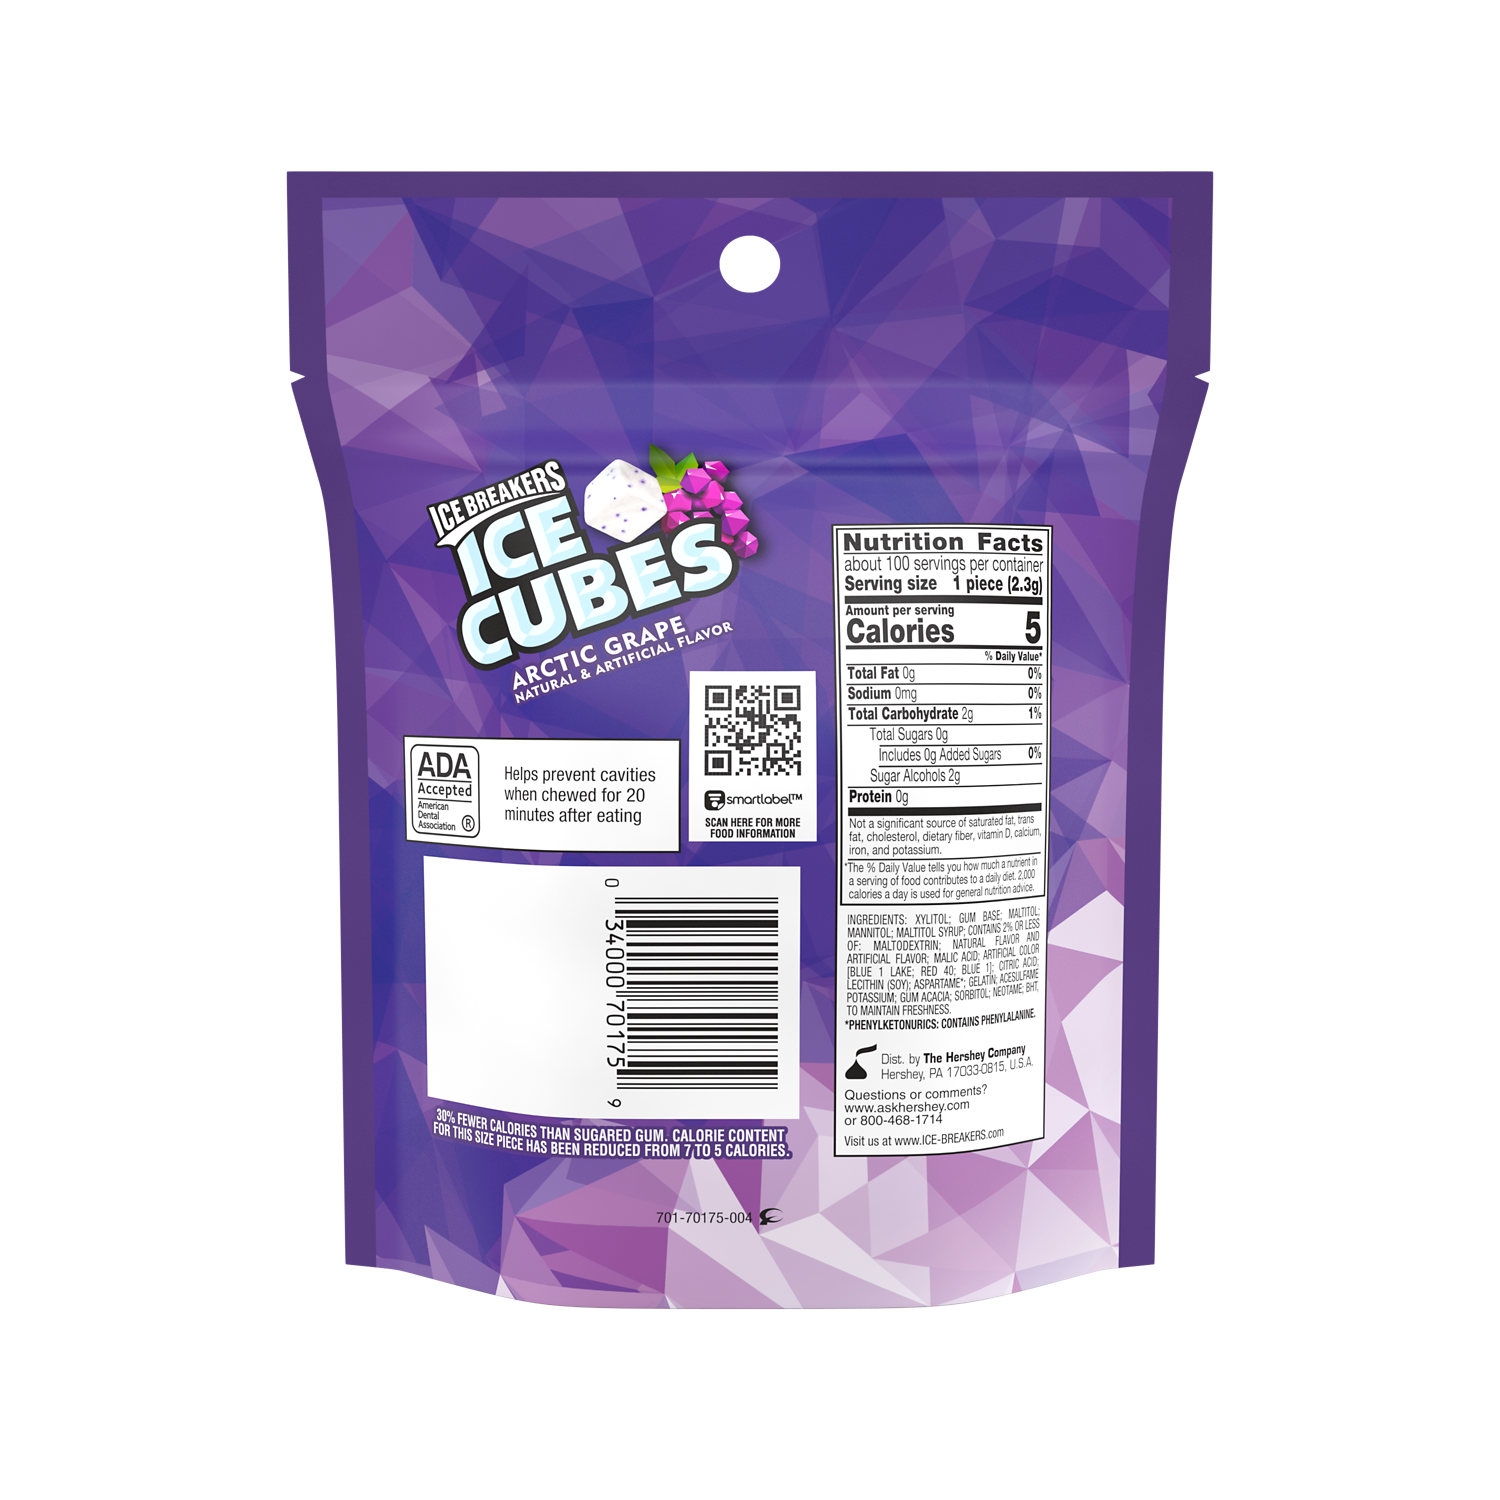 ICE BREAKERS ICE CUBES ARCTIC GRAPE Sugar Free Gum, 8.11 oz bag, 100 pieces - Back of Package